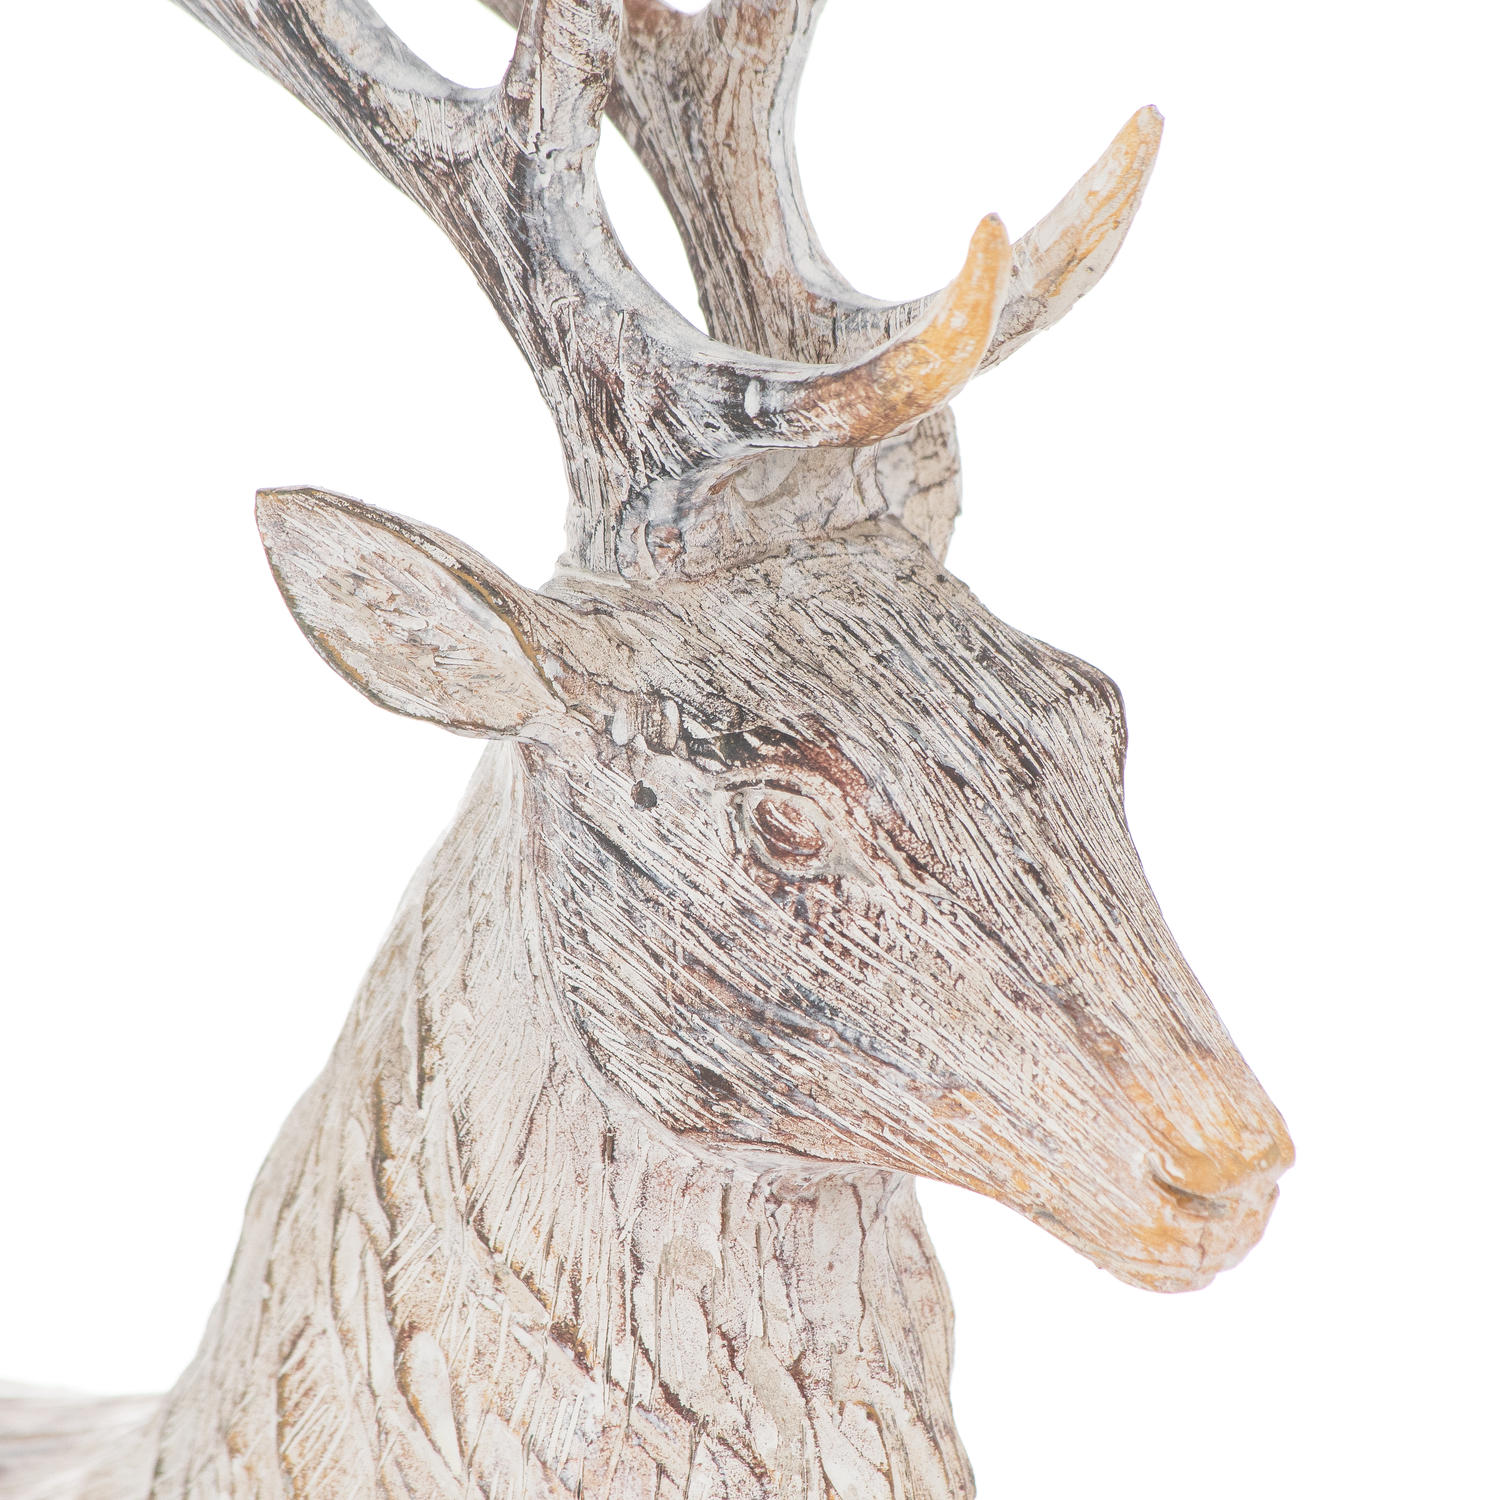 Carved Wood Effect Standing Stag - Image 2